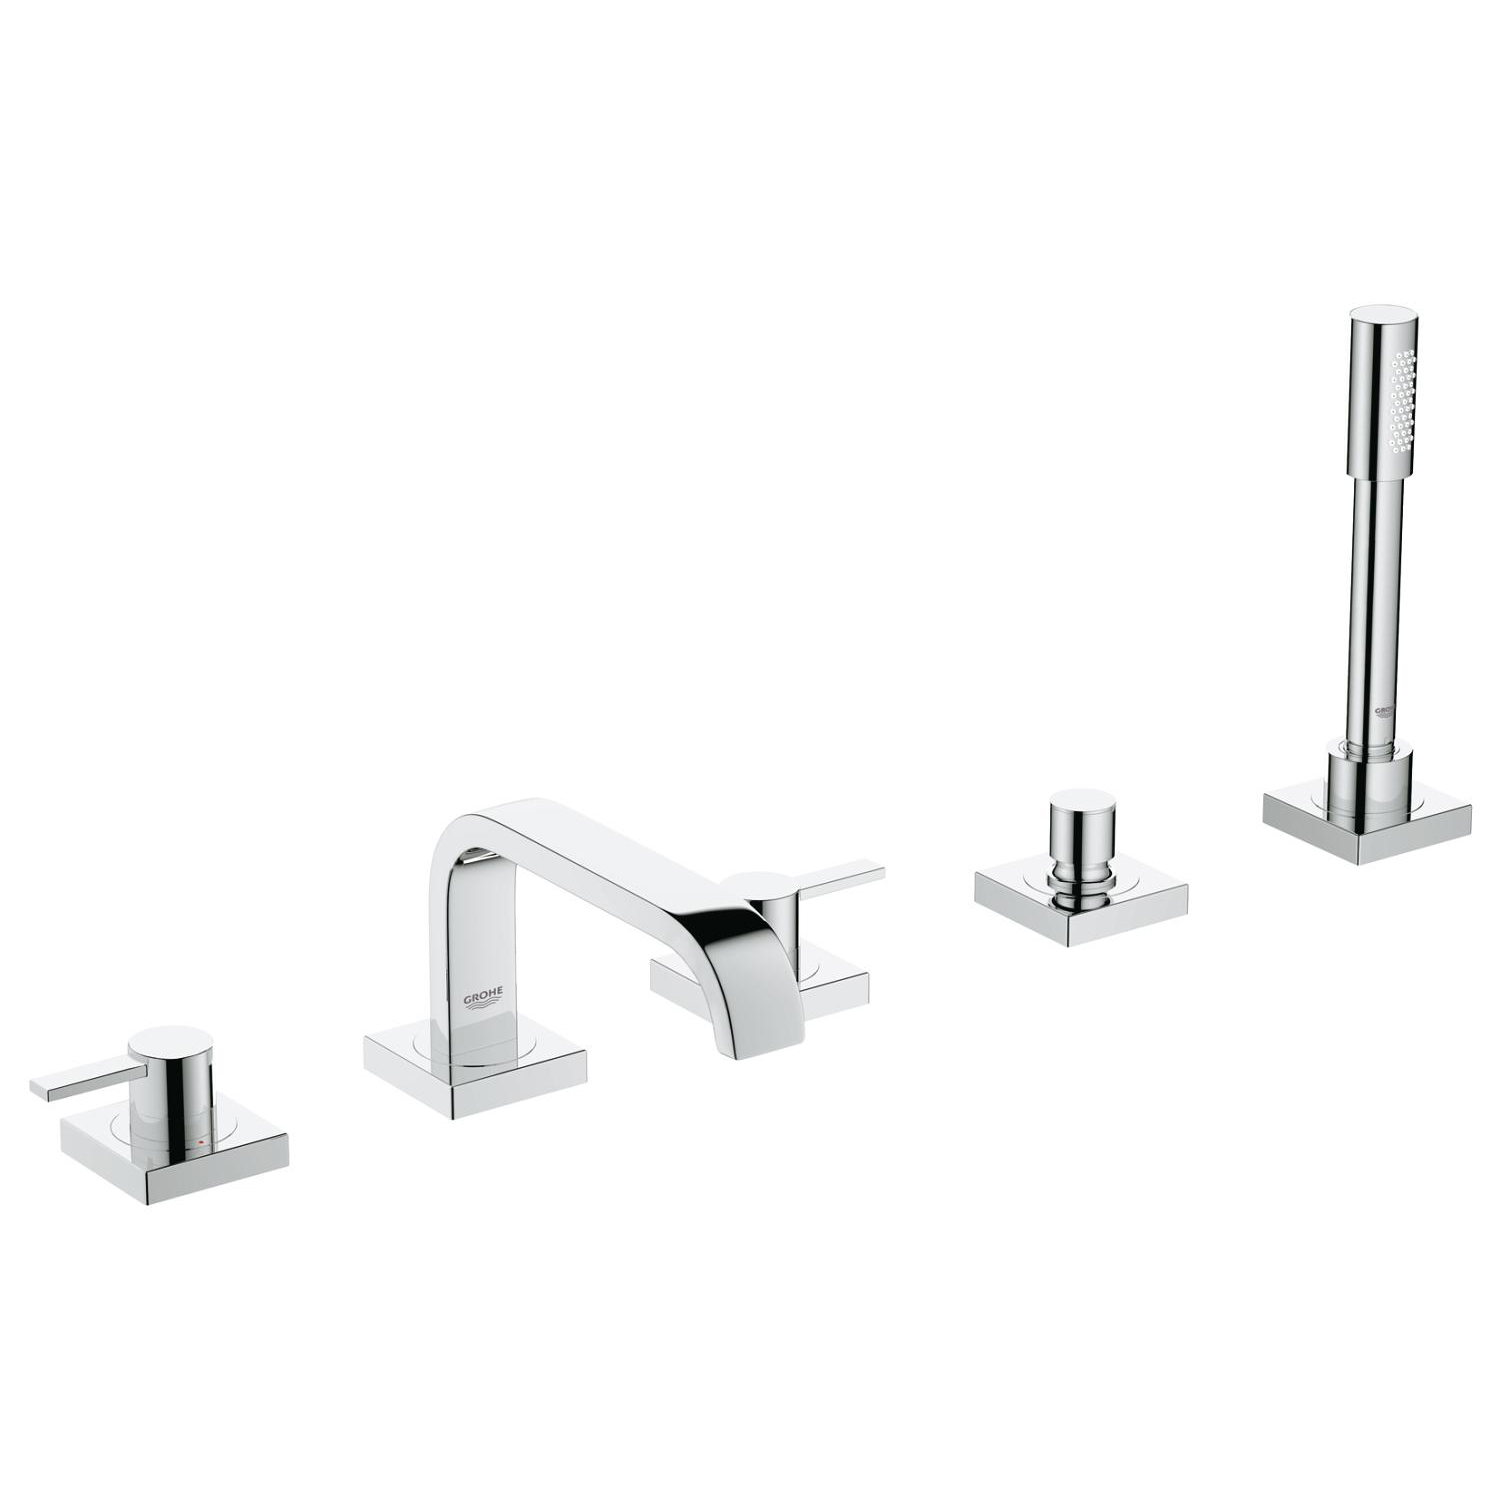 Allure Deck Mounted Tub Faucet Plus Hand Shower In StarLight Chrome